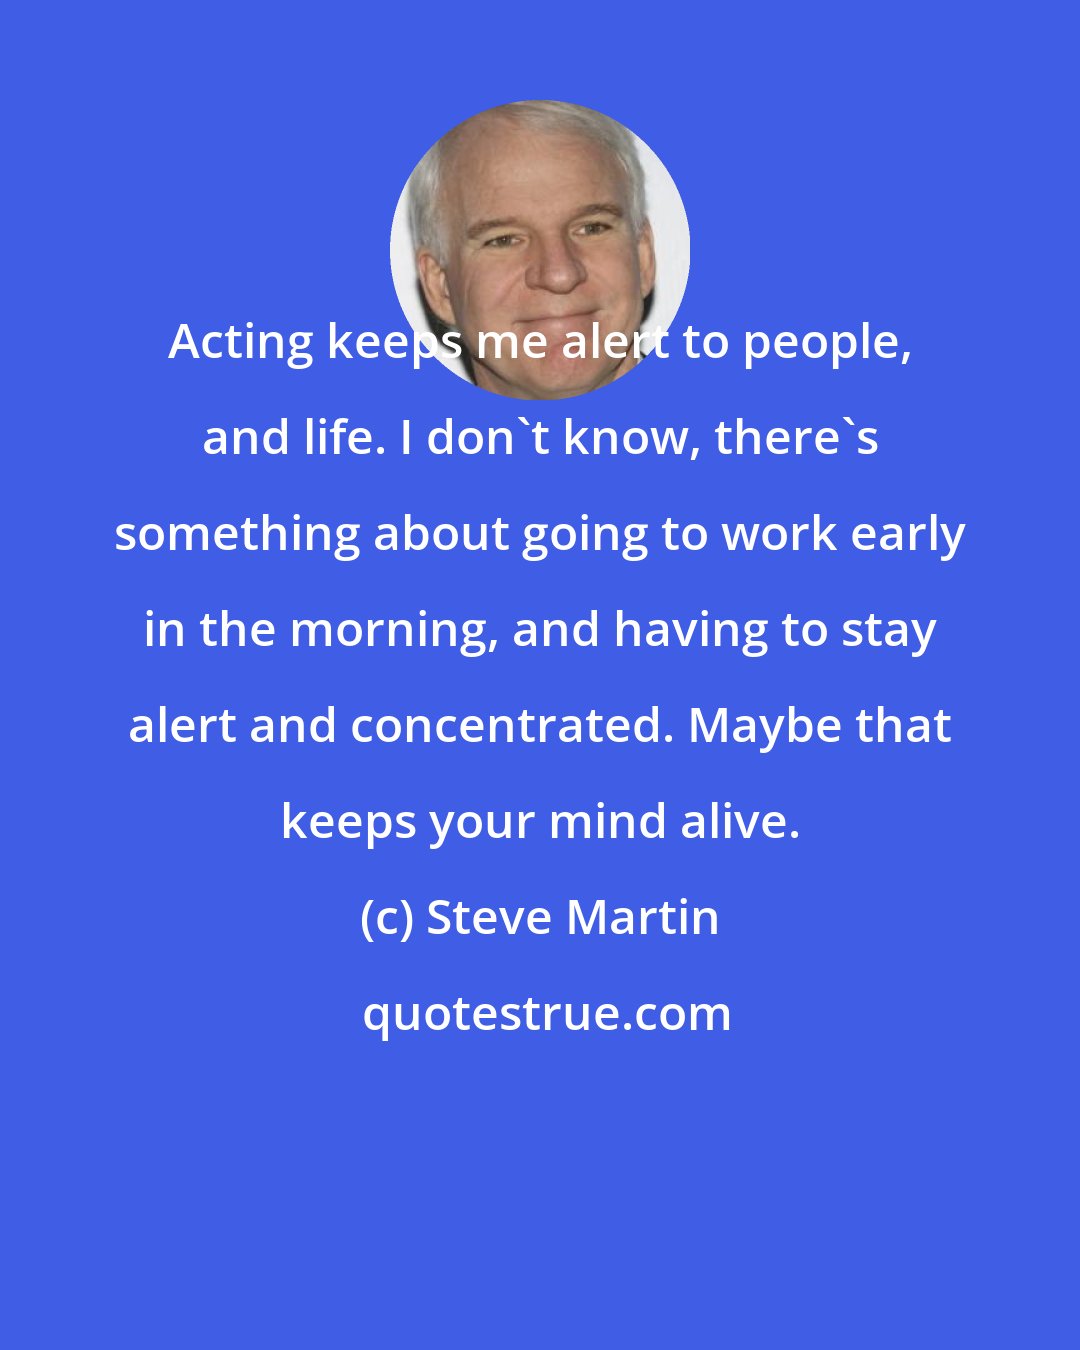 Steve Martin: Acting keeps me alert to people, and life. I don't know, there's something about going to work early in the morning, and having to stay alert and concentrated. Maybe that keeps your mind alive.